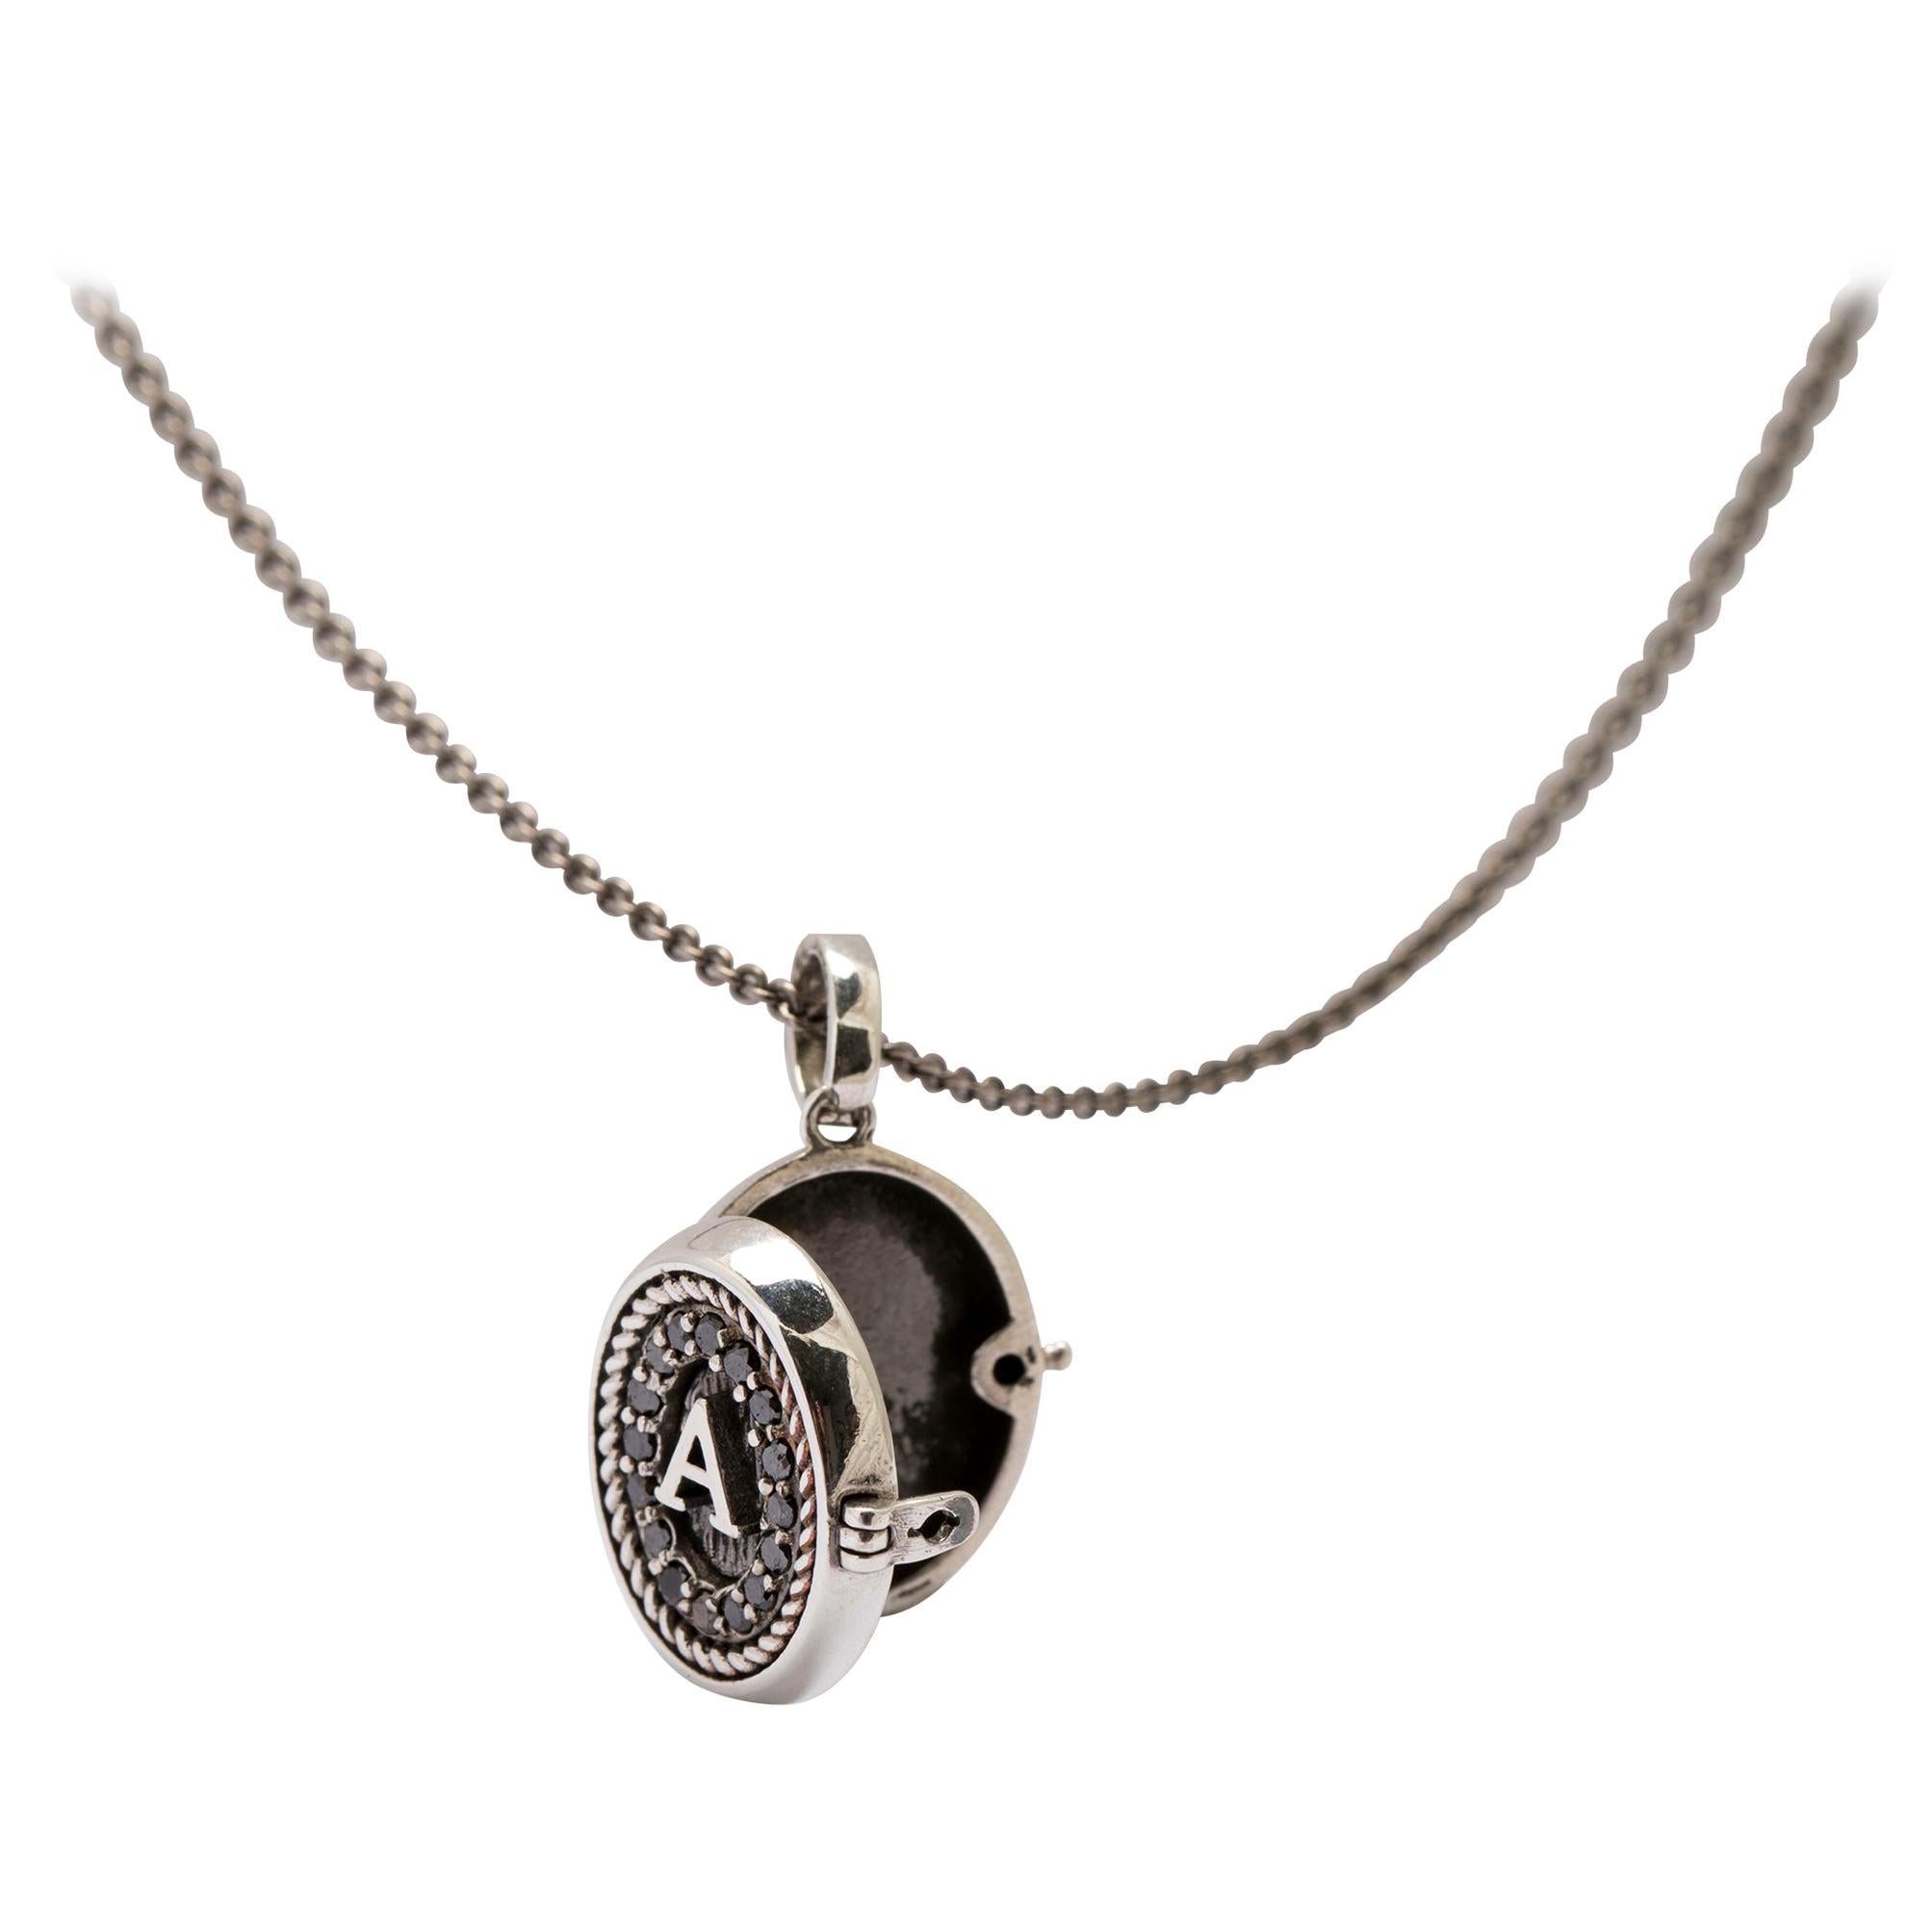 Initials Locket Pendant Signet in Silver and Black Diamond Pavè from IOSSELLIANI For Sale